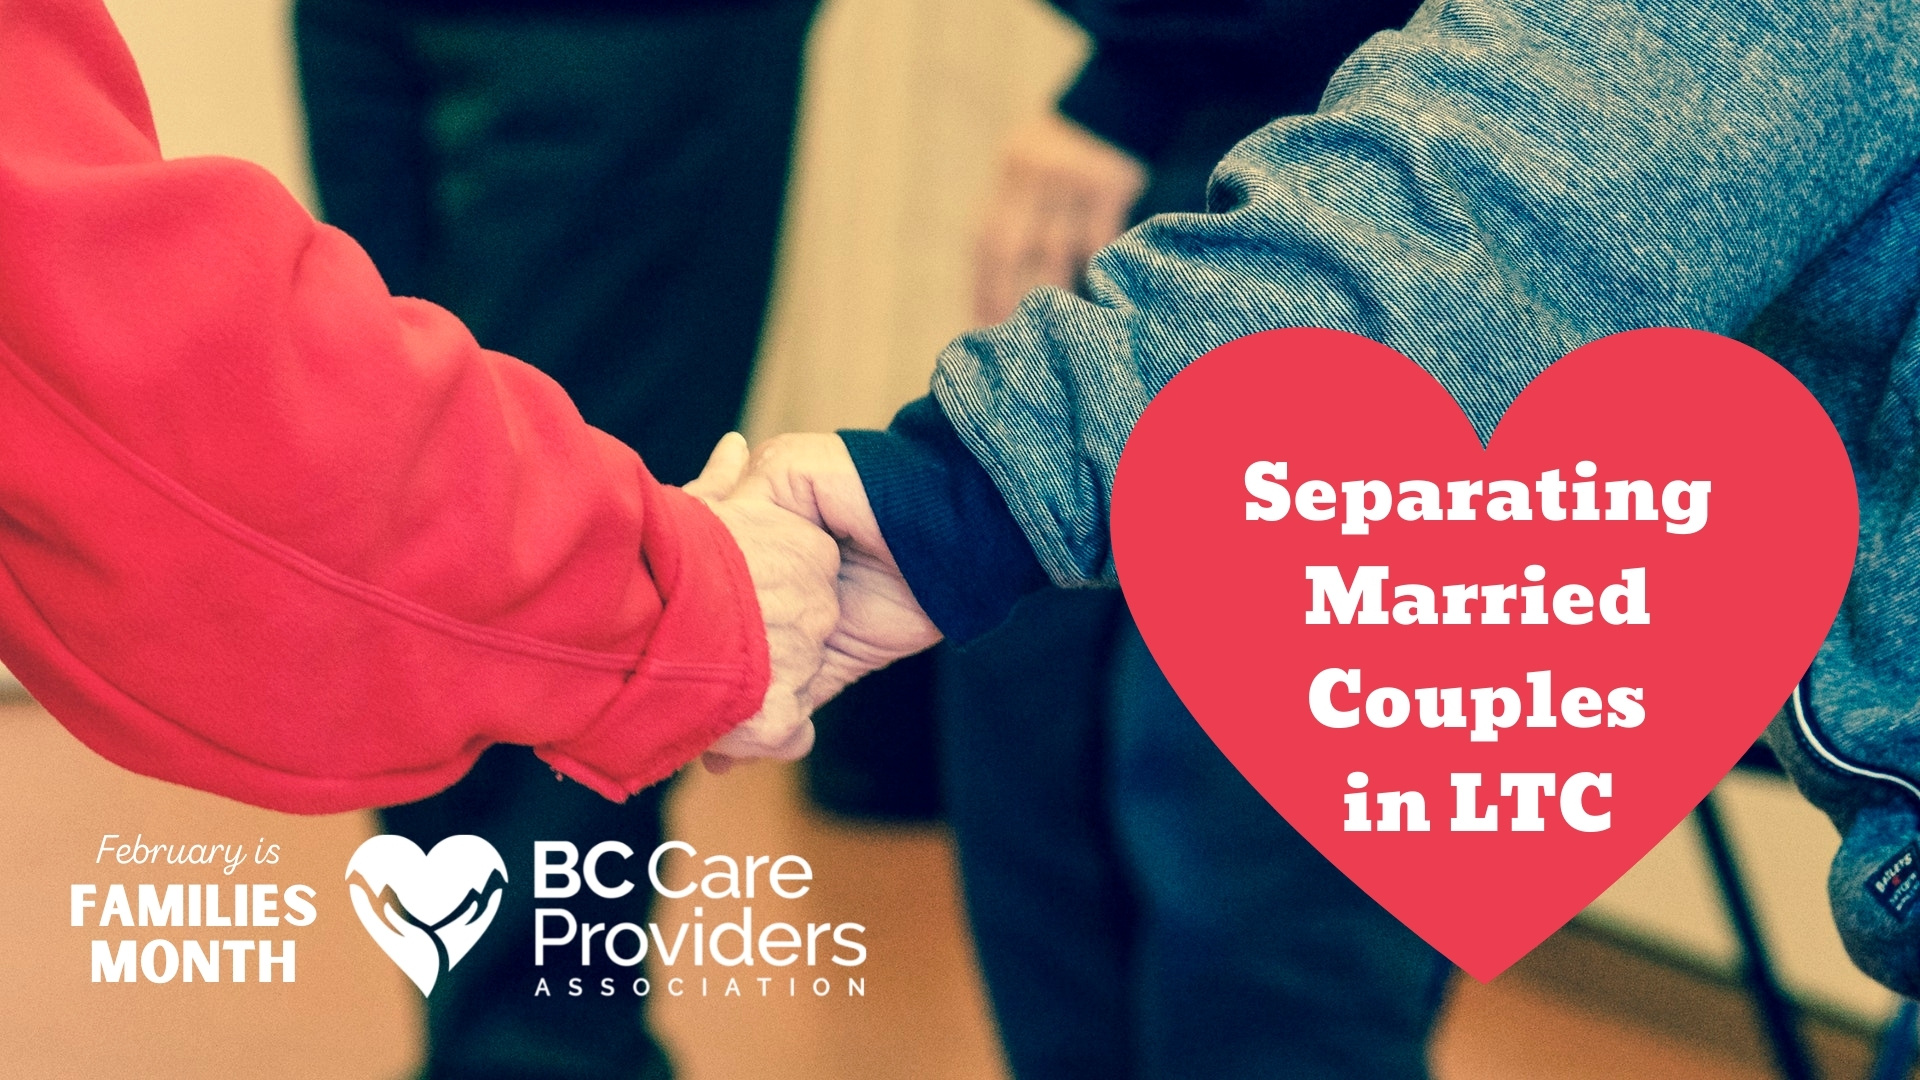 #FamiliesMonth feature: What happens when couples are separated in LTC?